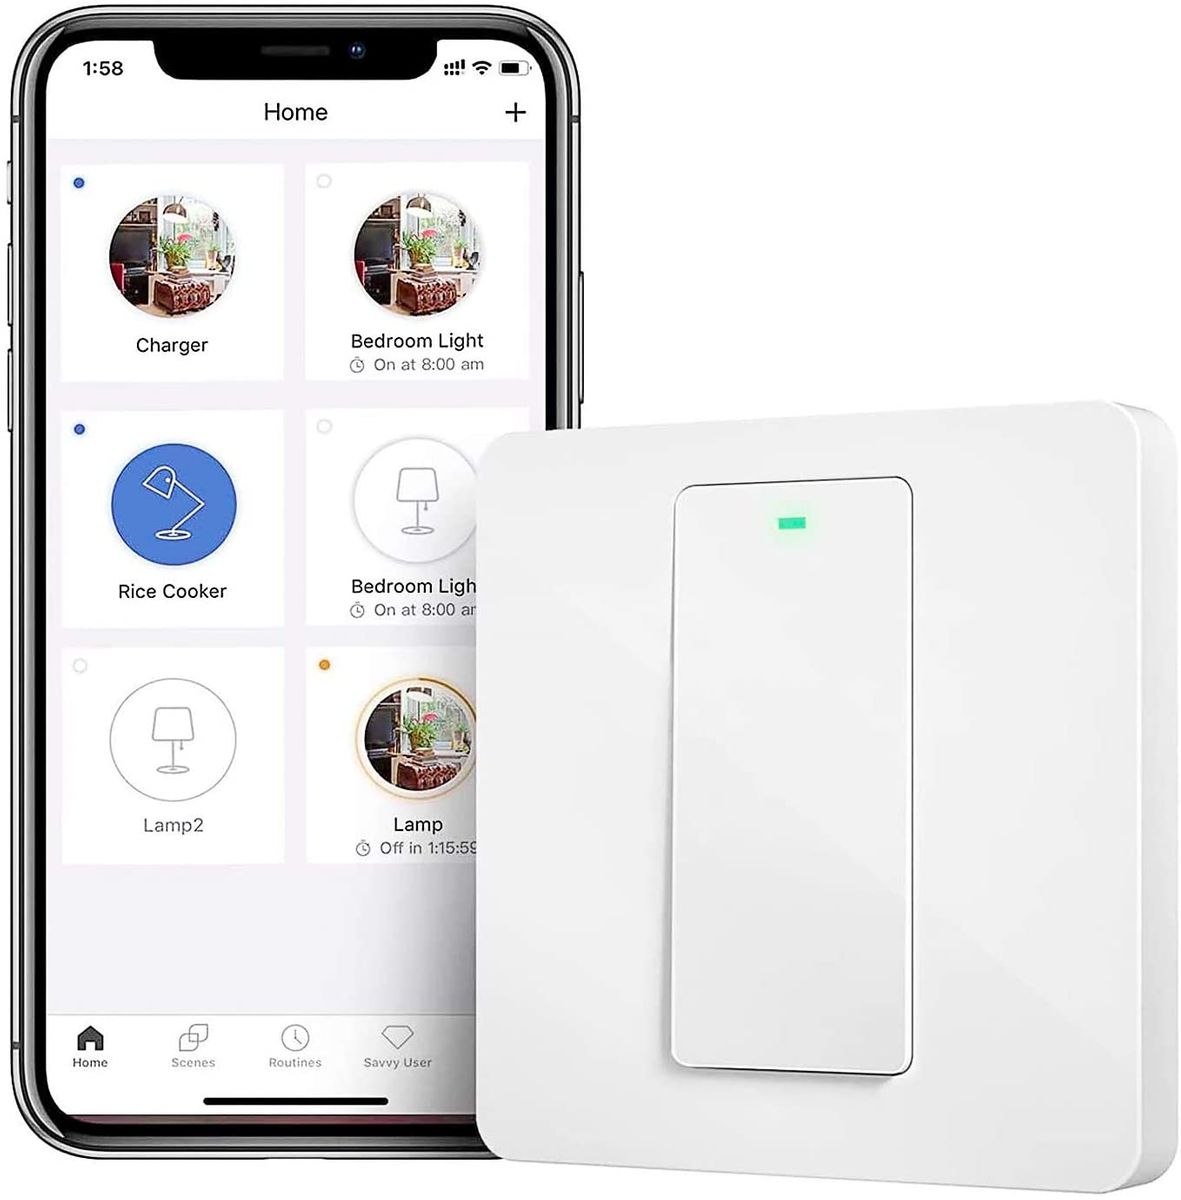 Meross smart light switch WLAN wall switch, 1 gang requires neutral wire, physical button switch, compatible with Alexa, Google Home and SmartThings, 2.4 GHz, No hub required, MSS510XEU